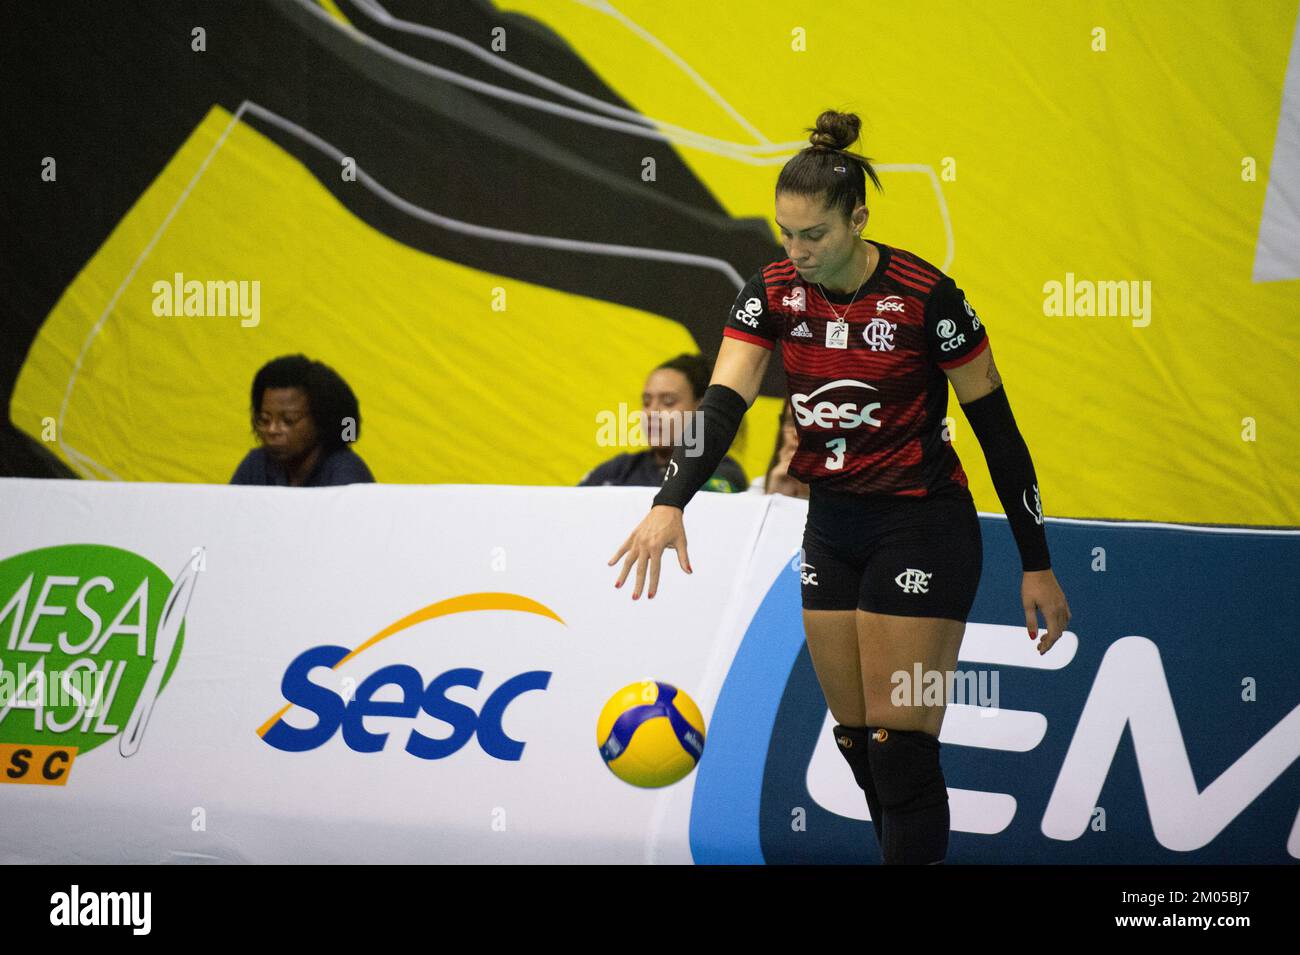 Rio De Janeiro, Brazil. 03rd Dec, 2022. Game between Sesc Flamengo and Esporte Clube Pinheiros in the eighth round of the Volleyball Women's Super League, held at the Tijuca Tênis Clube Gym in the city of Rio de Janeiro, RJ. Credit: Renato Assis/FotoArena/Alamy Live News Stock Photo